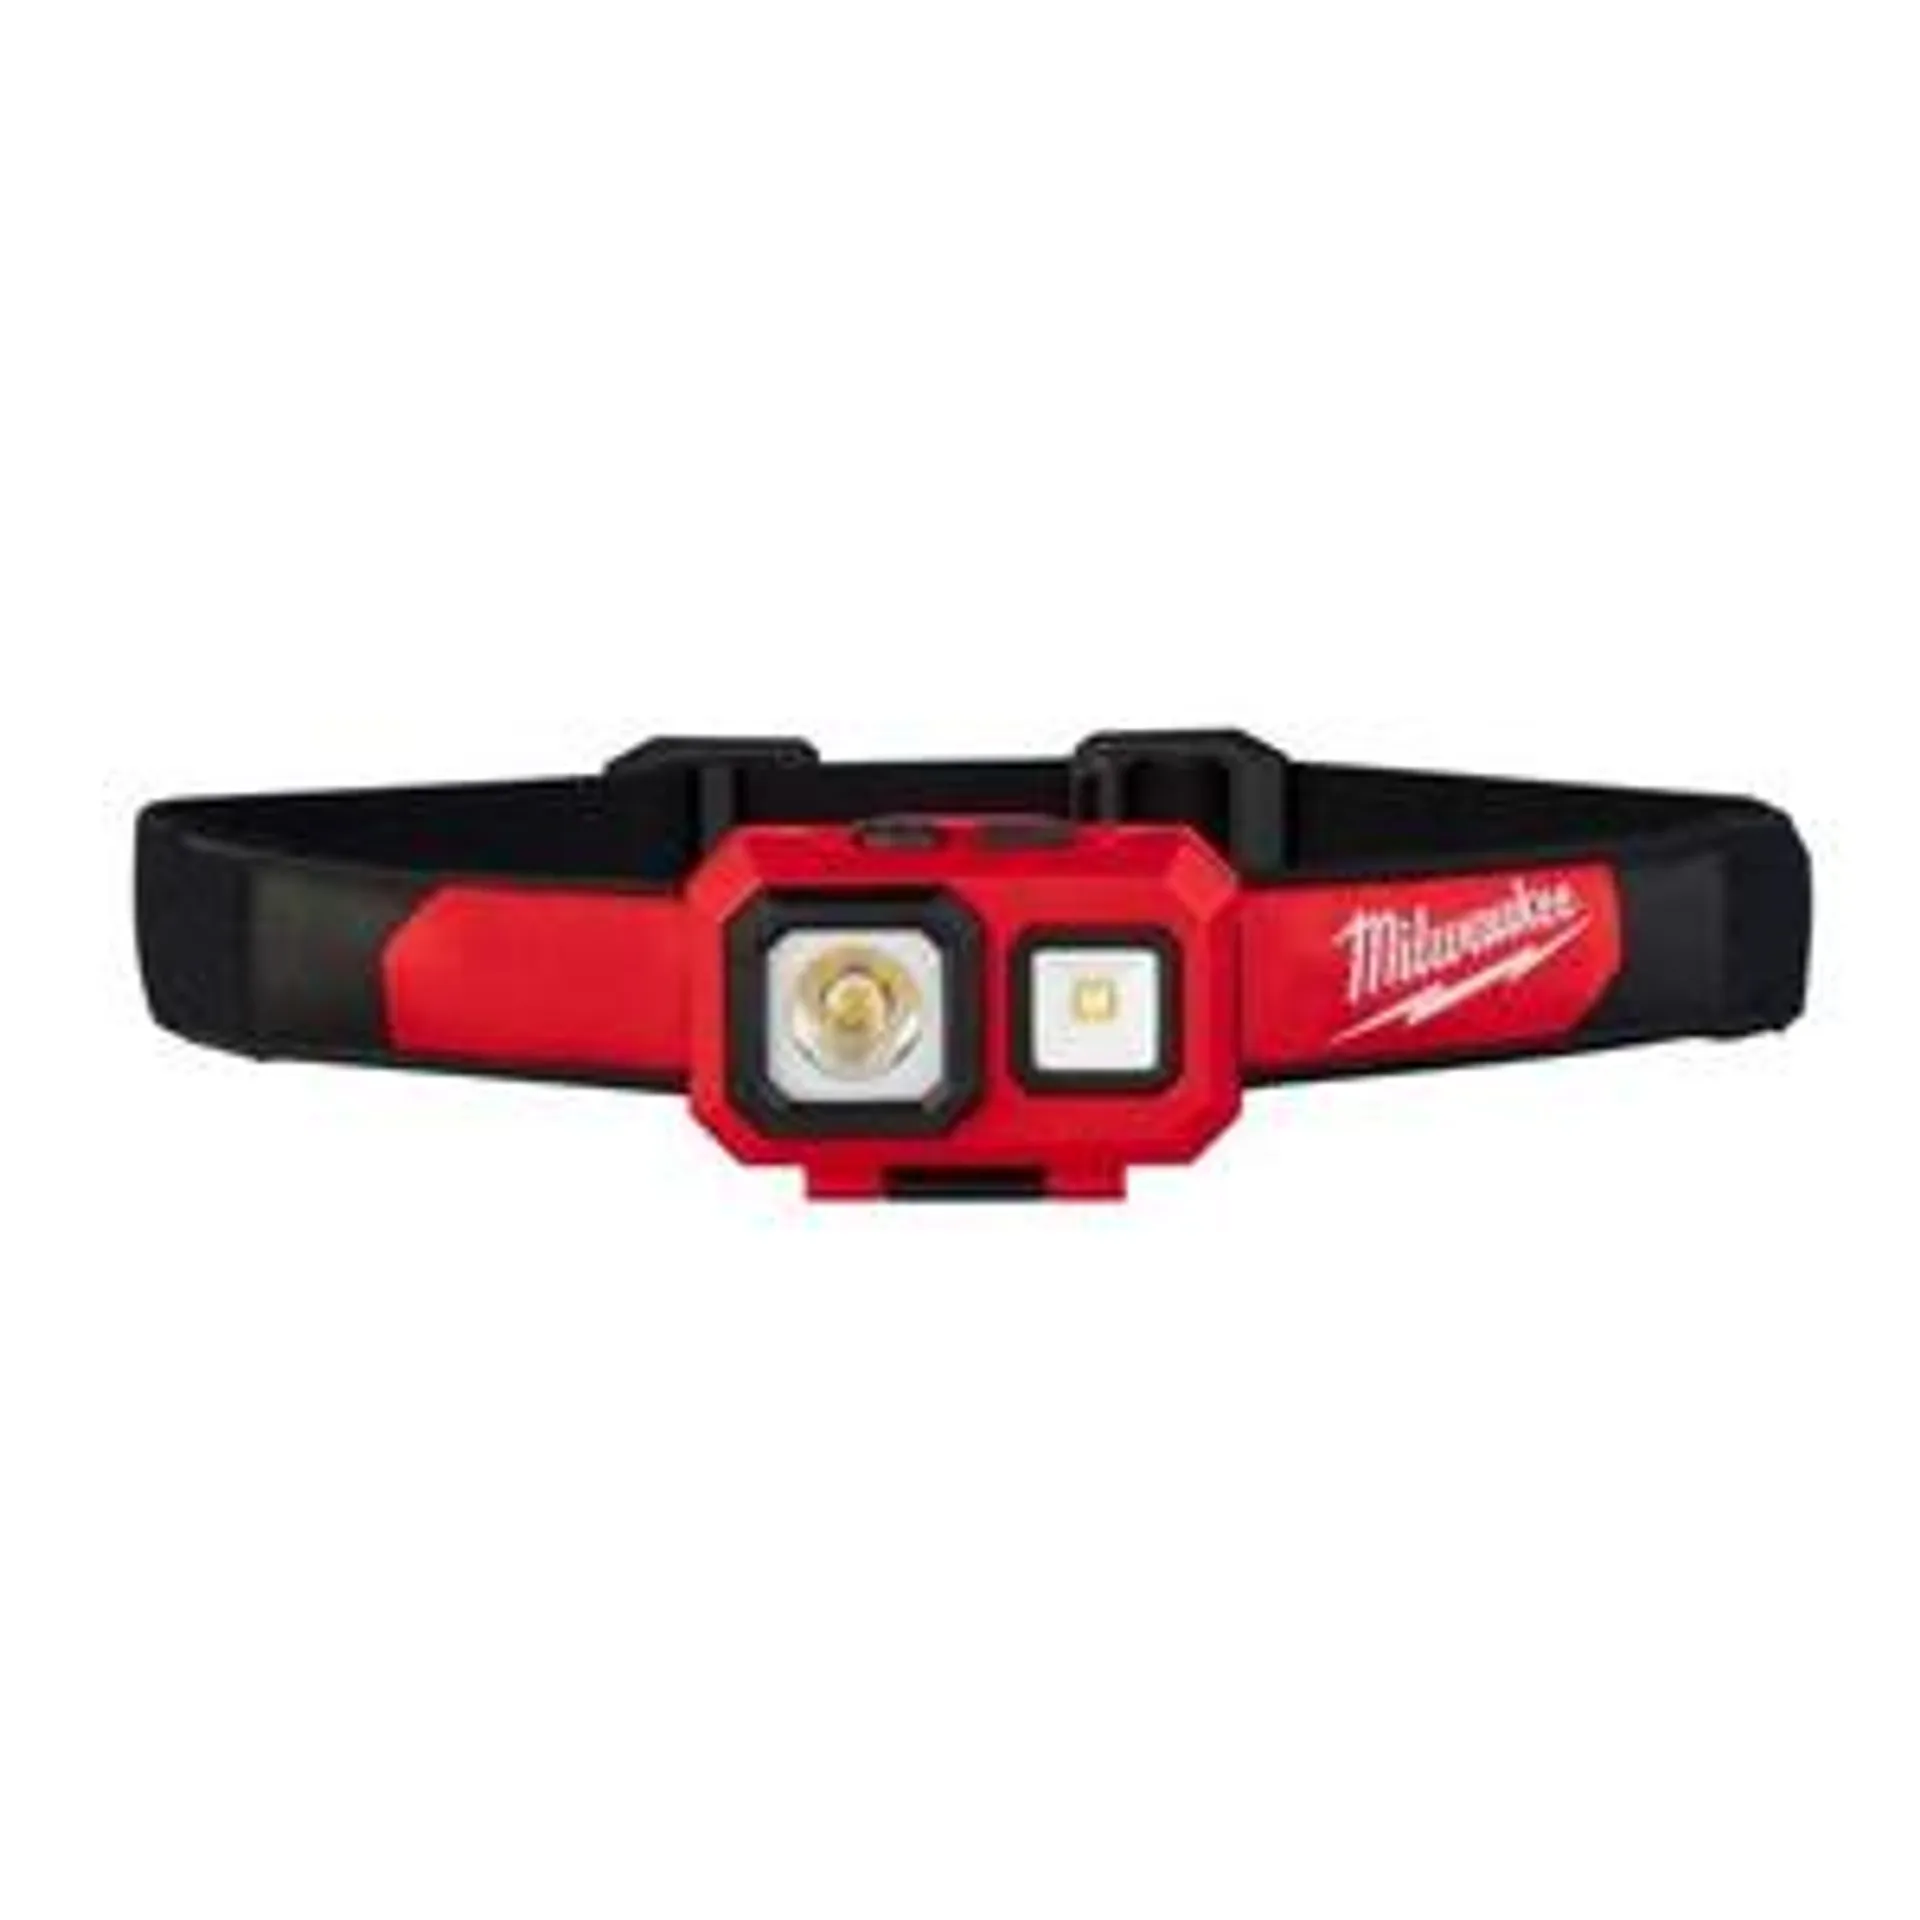 Head Lamp Spot and Flood with 3x AAA Alkaline Batteries